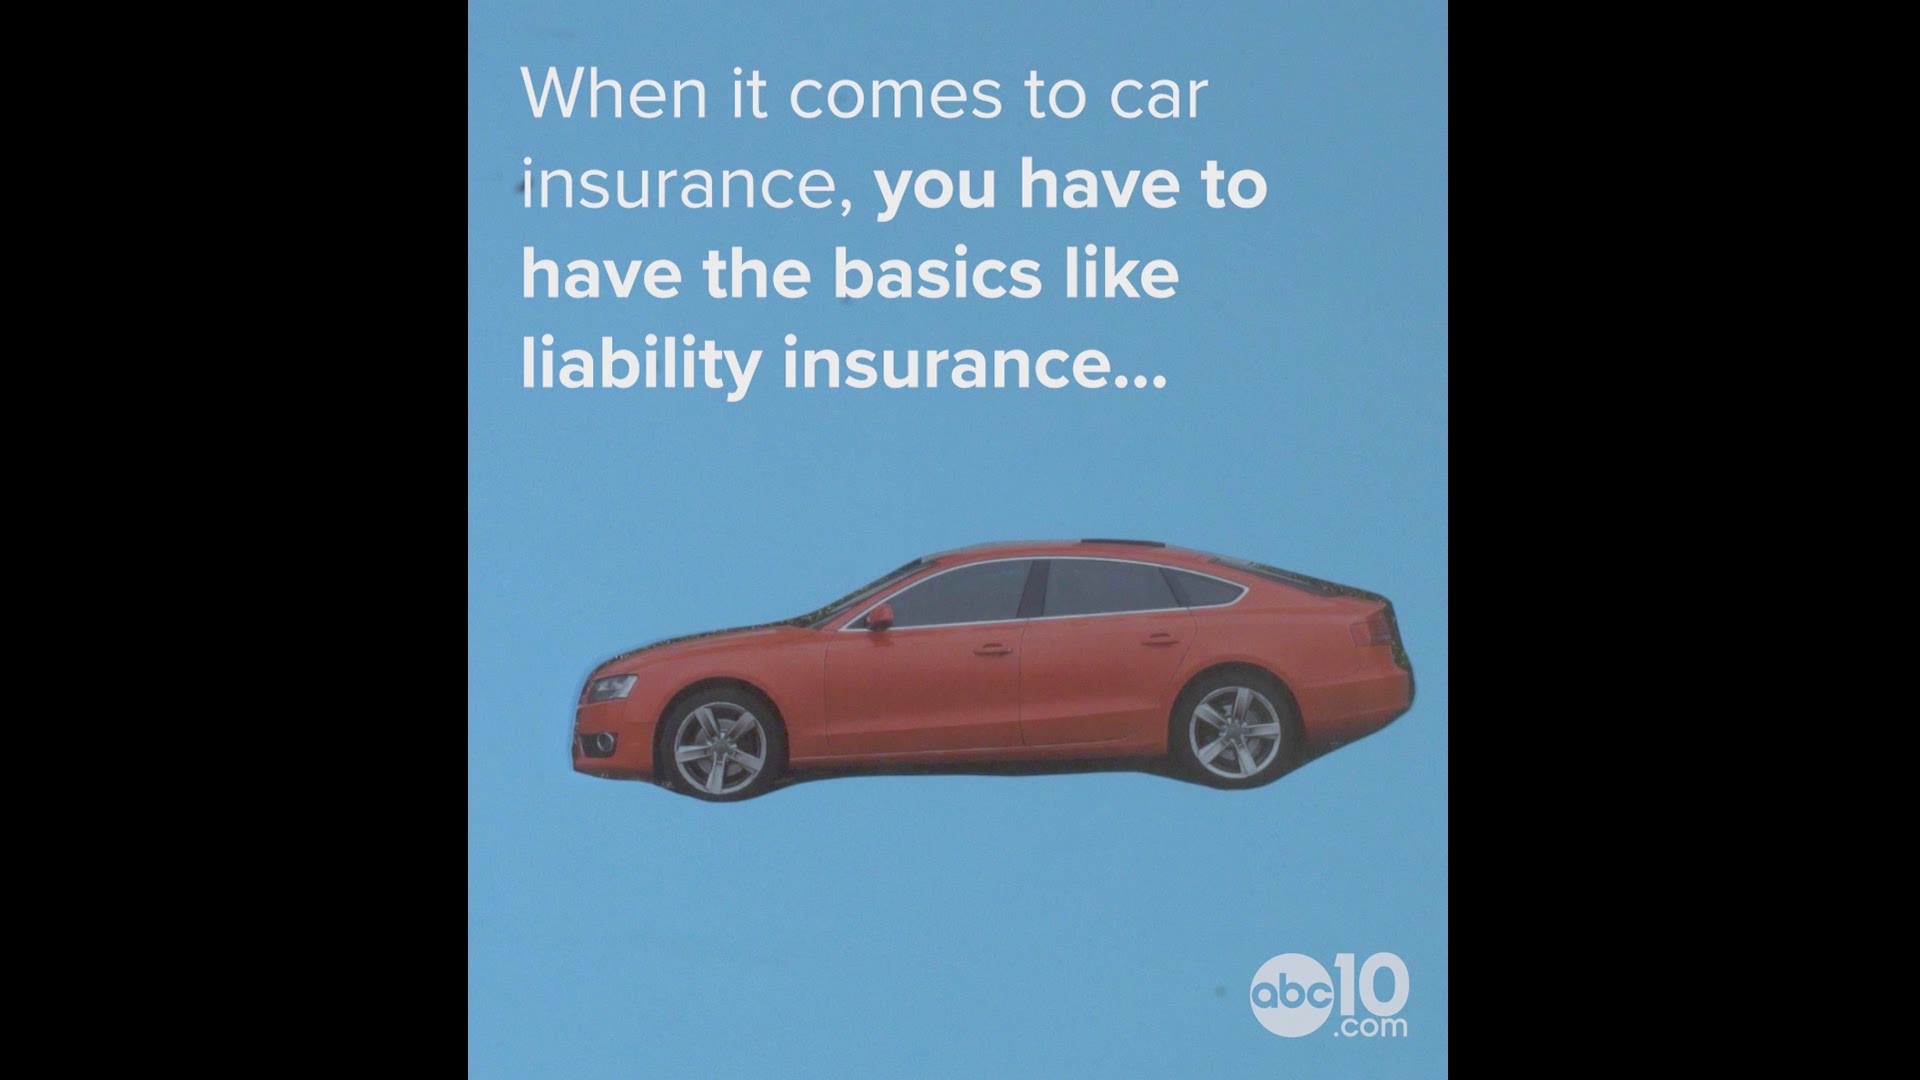 When it comes to car insurance, you have your basic requirements, but there are some extras you might want for when you damage your car.